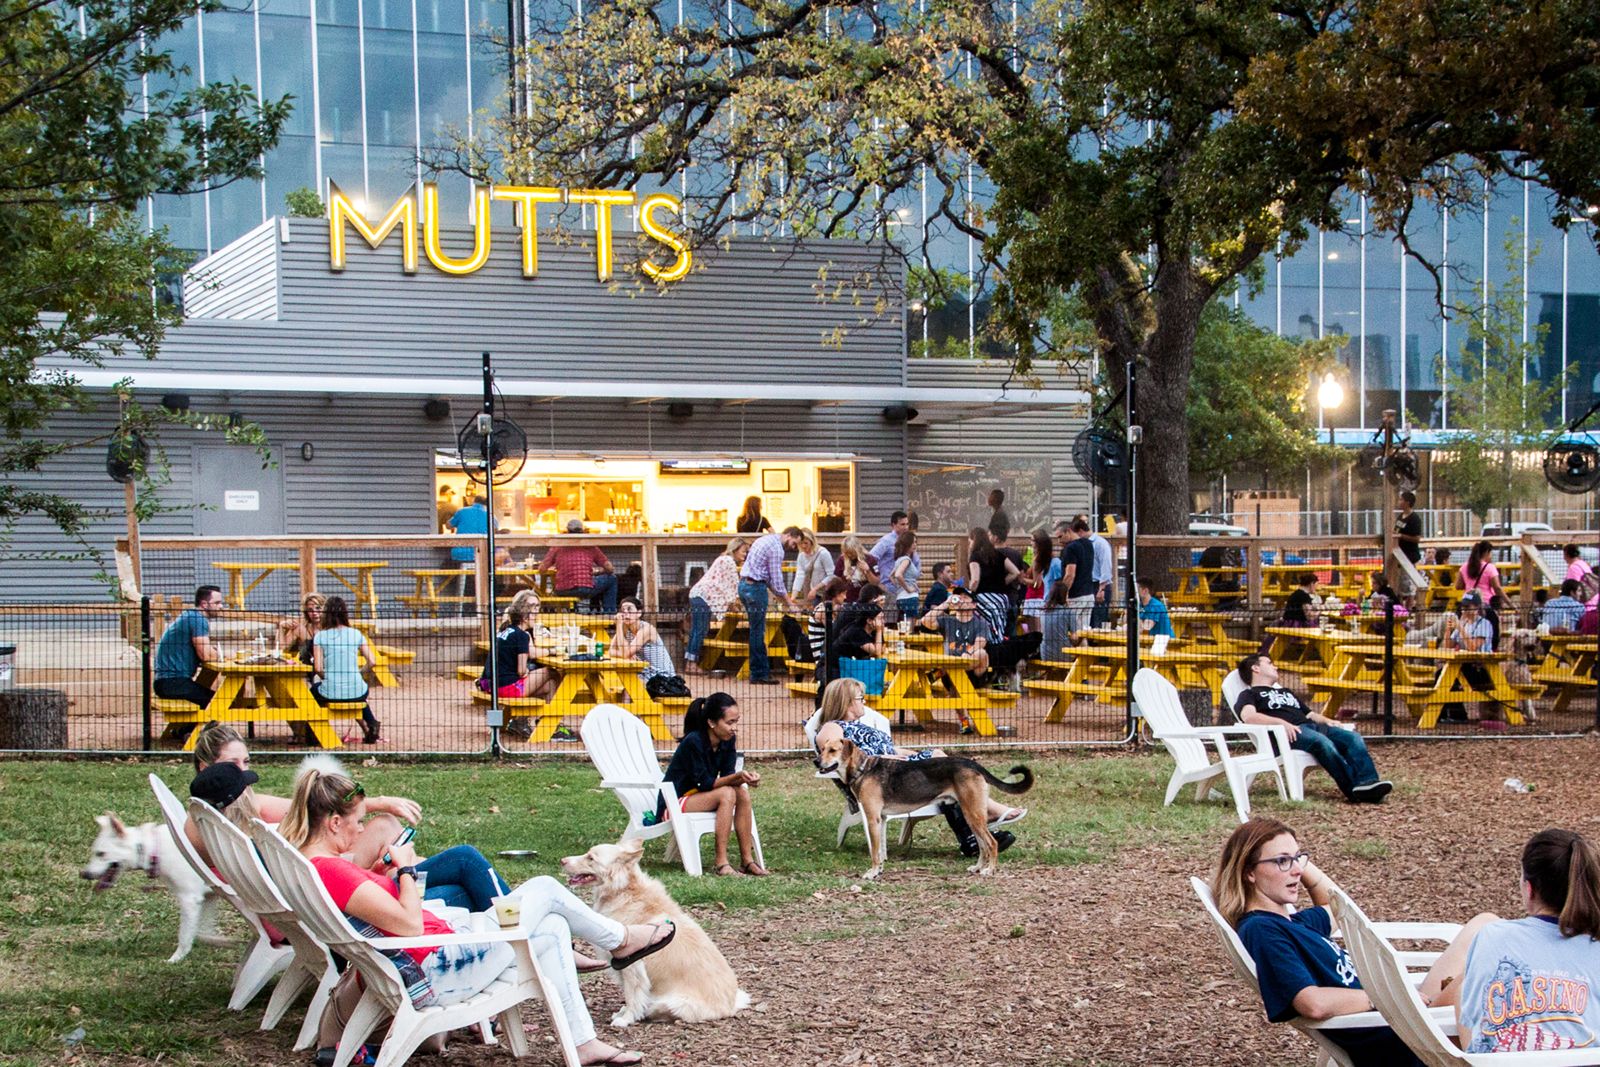 Mutts Canine Cantina Chooses Fransmart to Take Them Nationwide with Their Trend-Setting Restaurant/Cocktail Bar/Off-Leash Dog Park Eatertainment Concept